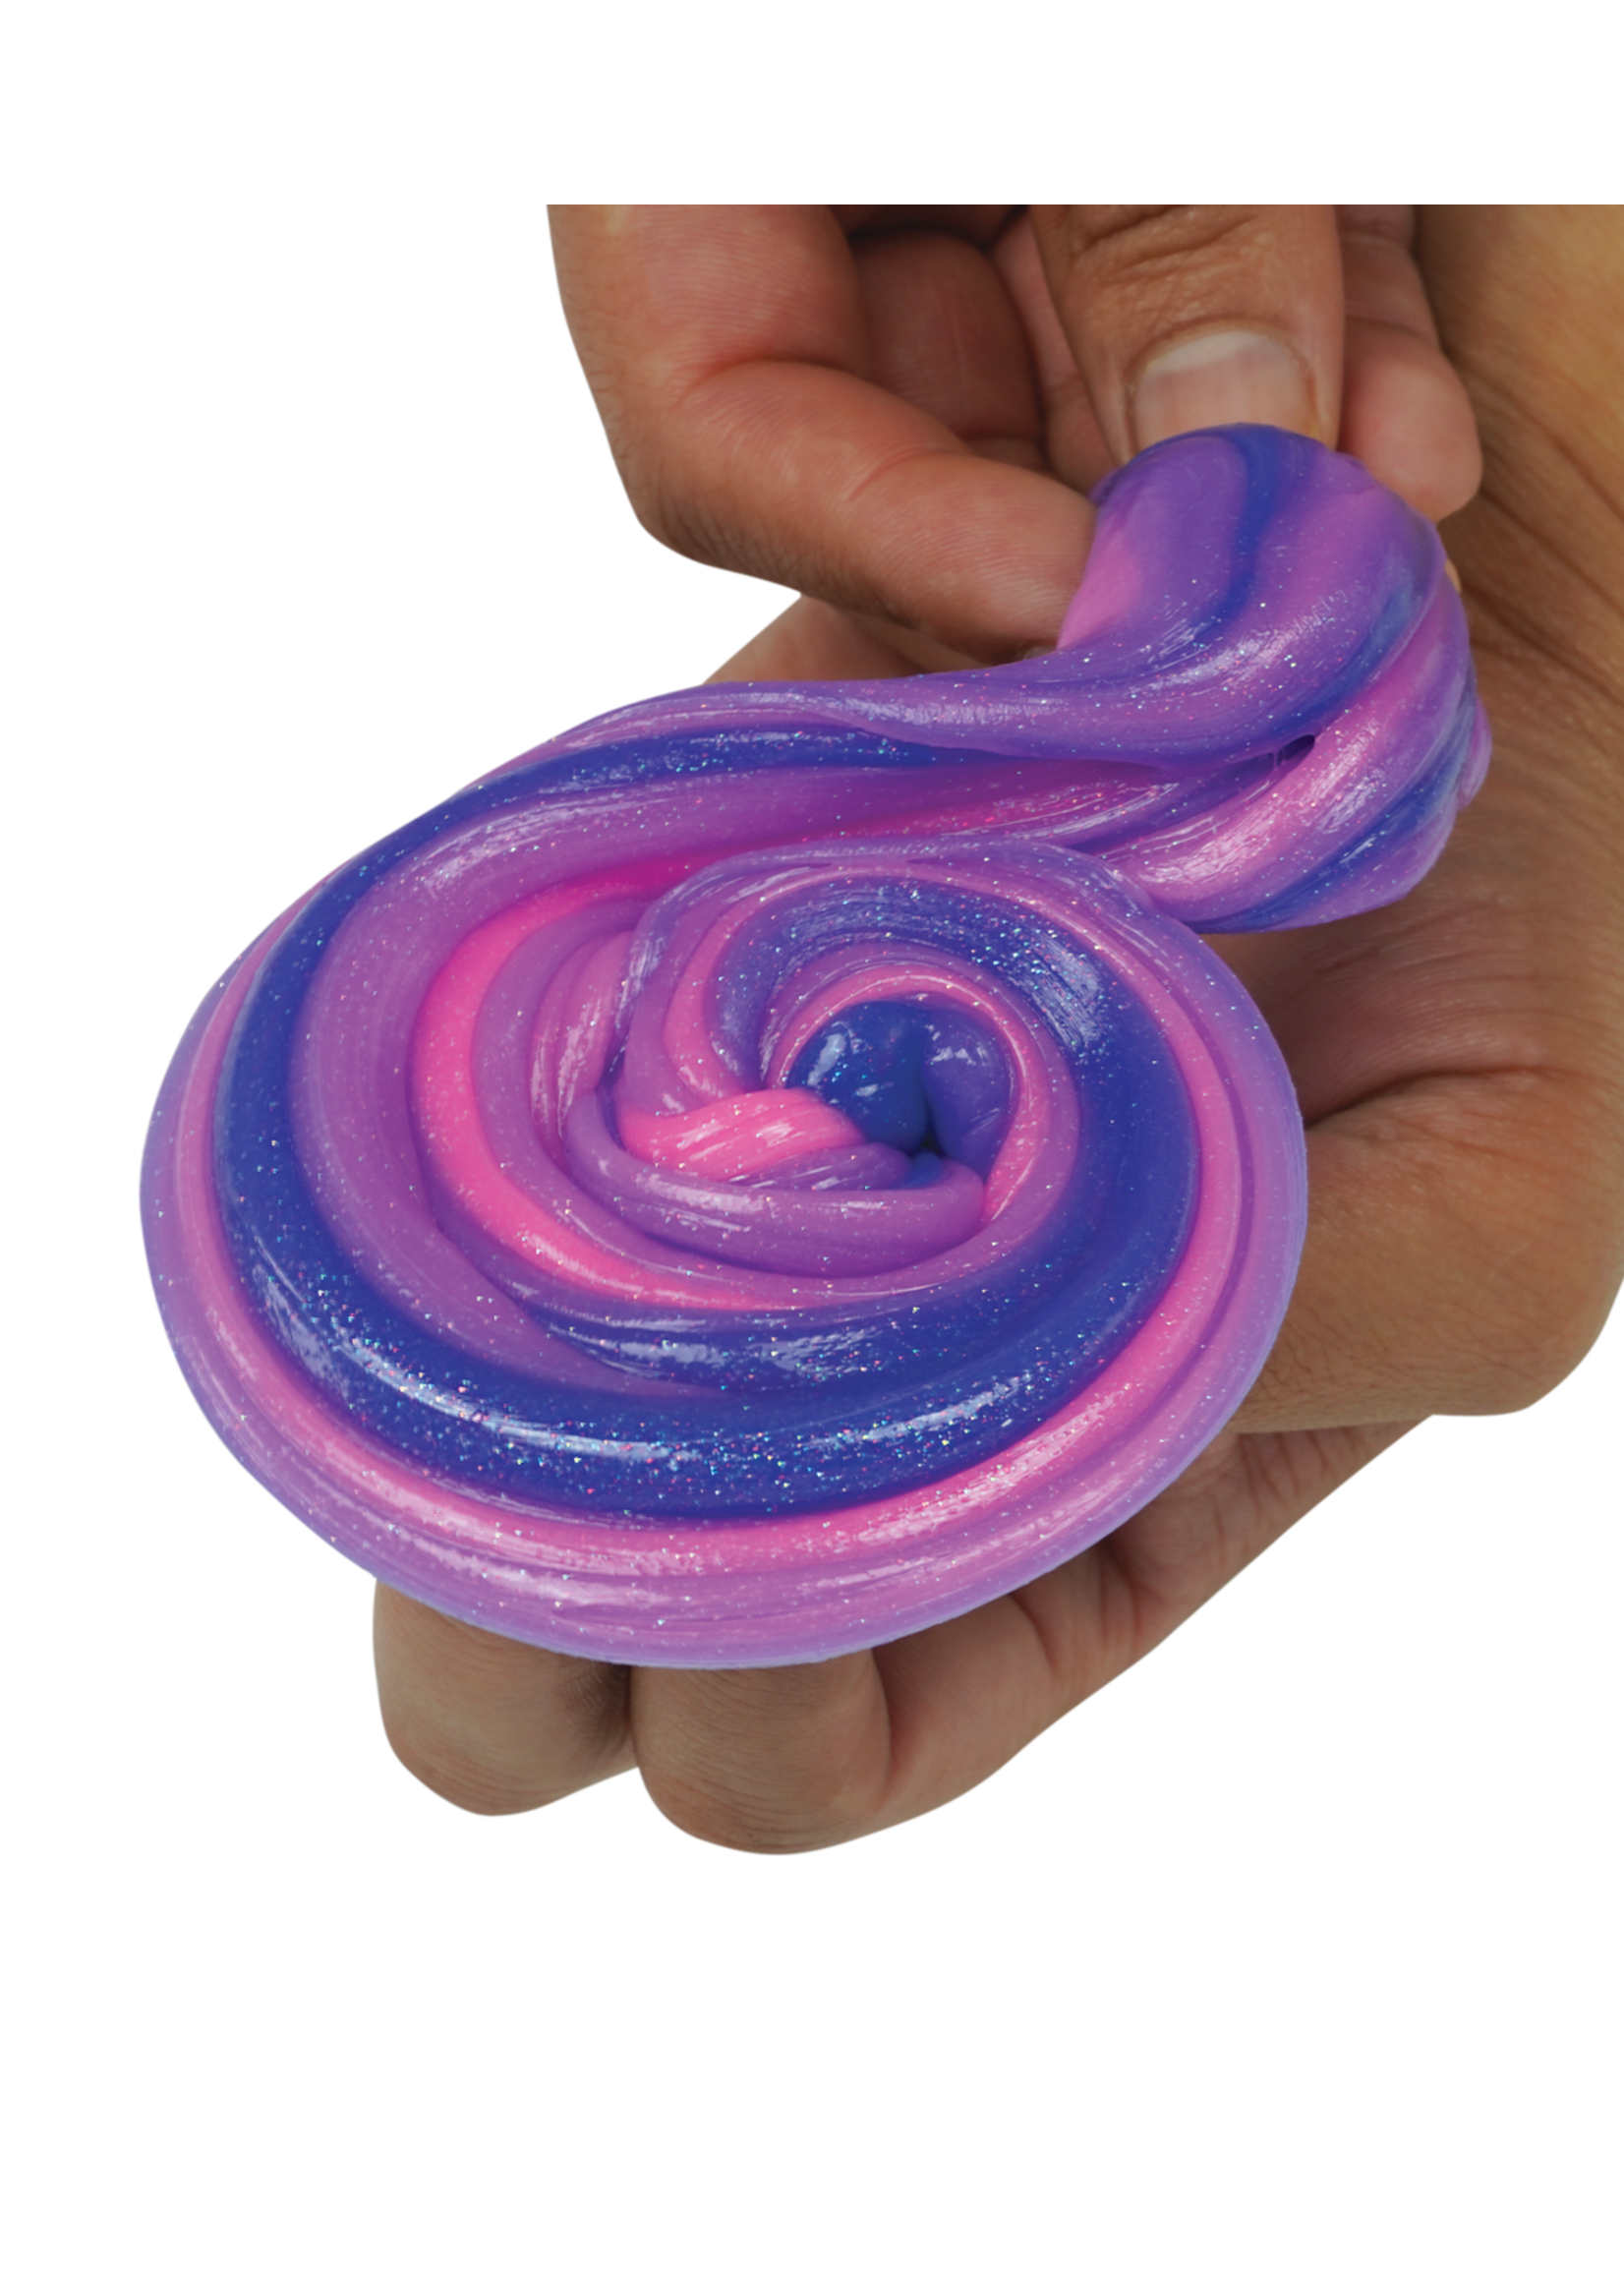 Crazy Aarons 3.2 oz - Hypercolor Intergalactic Thinking Putty